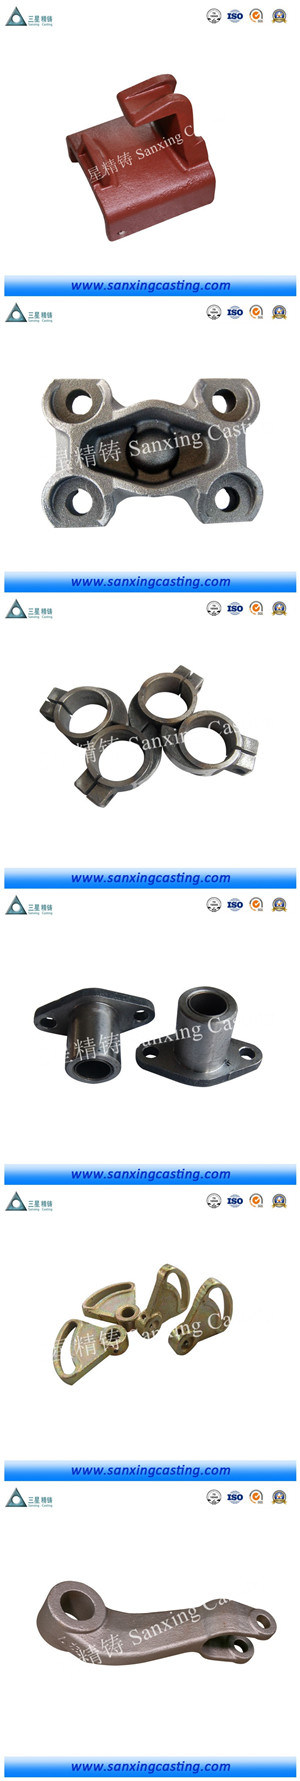 Motorcycle Parts Customized CNC Machined Brass Fittings Motorcycle Parts